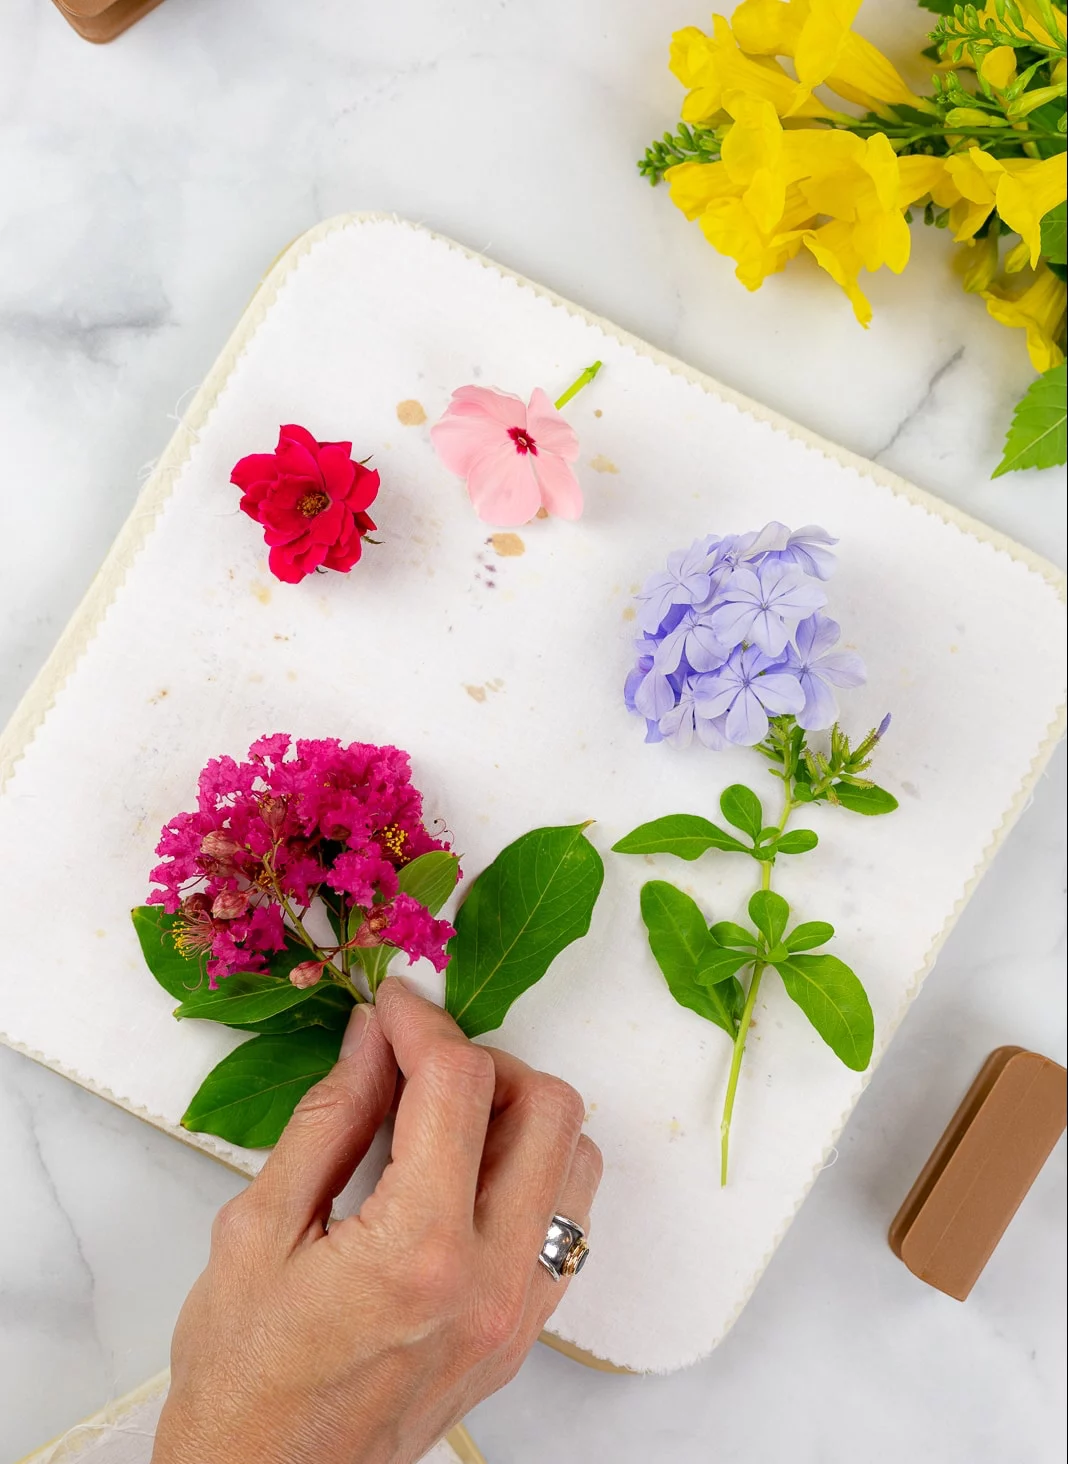 how to press flowers without turning brown